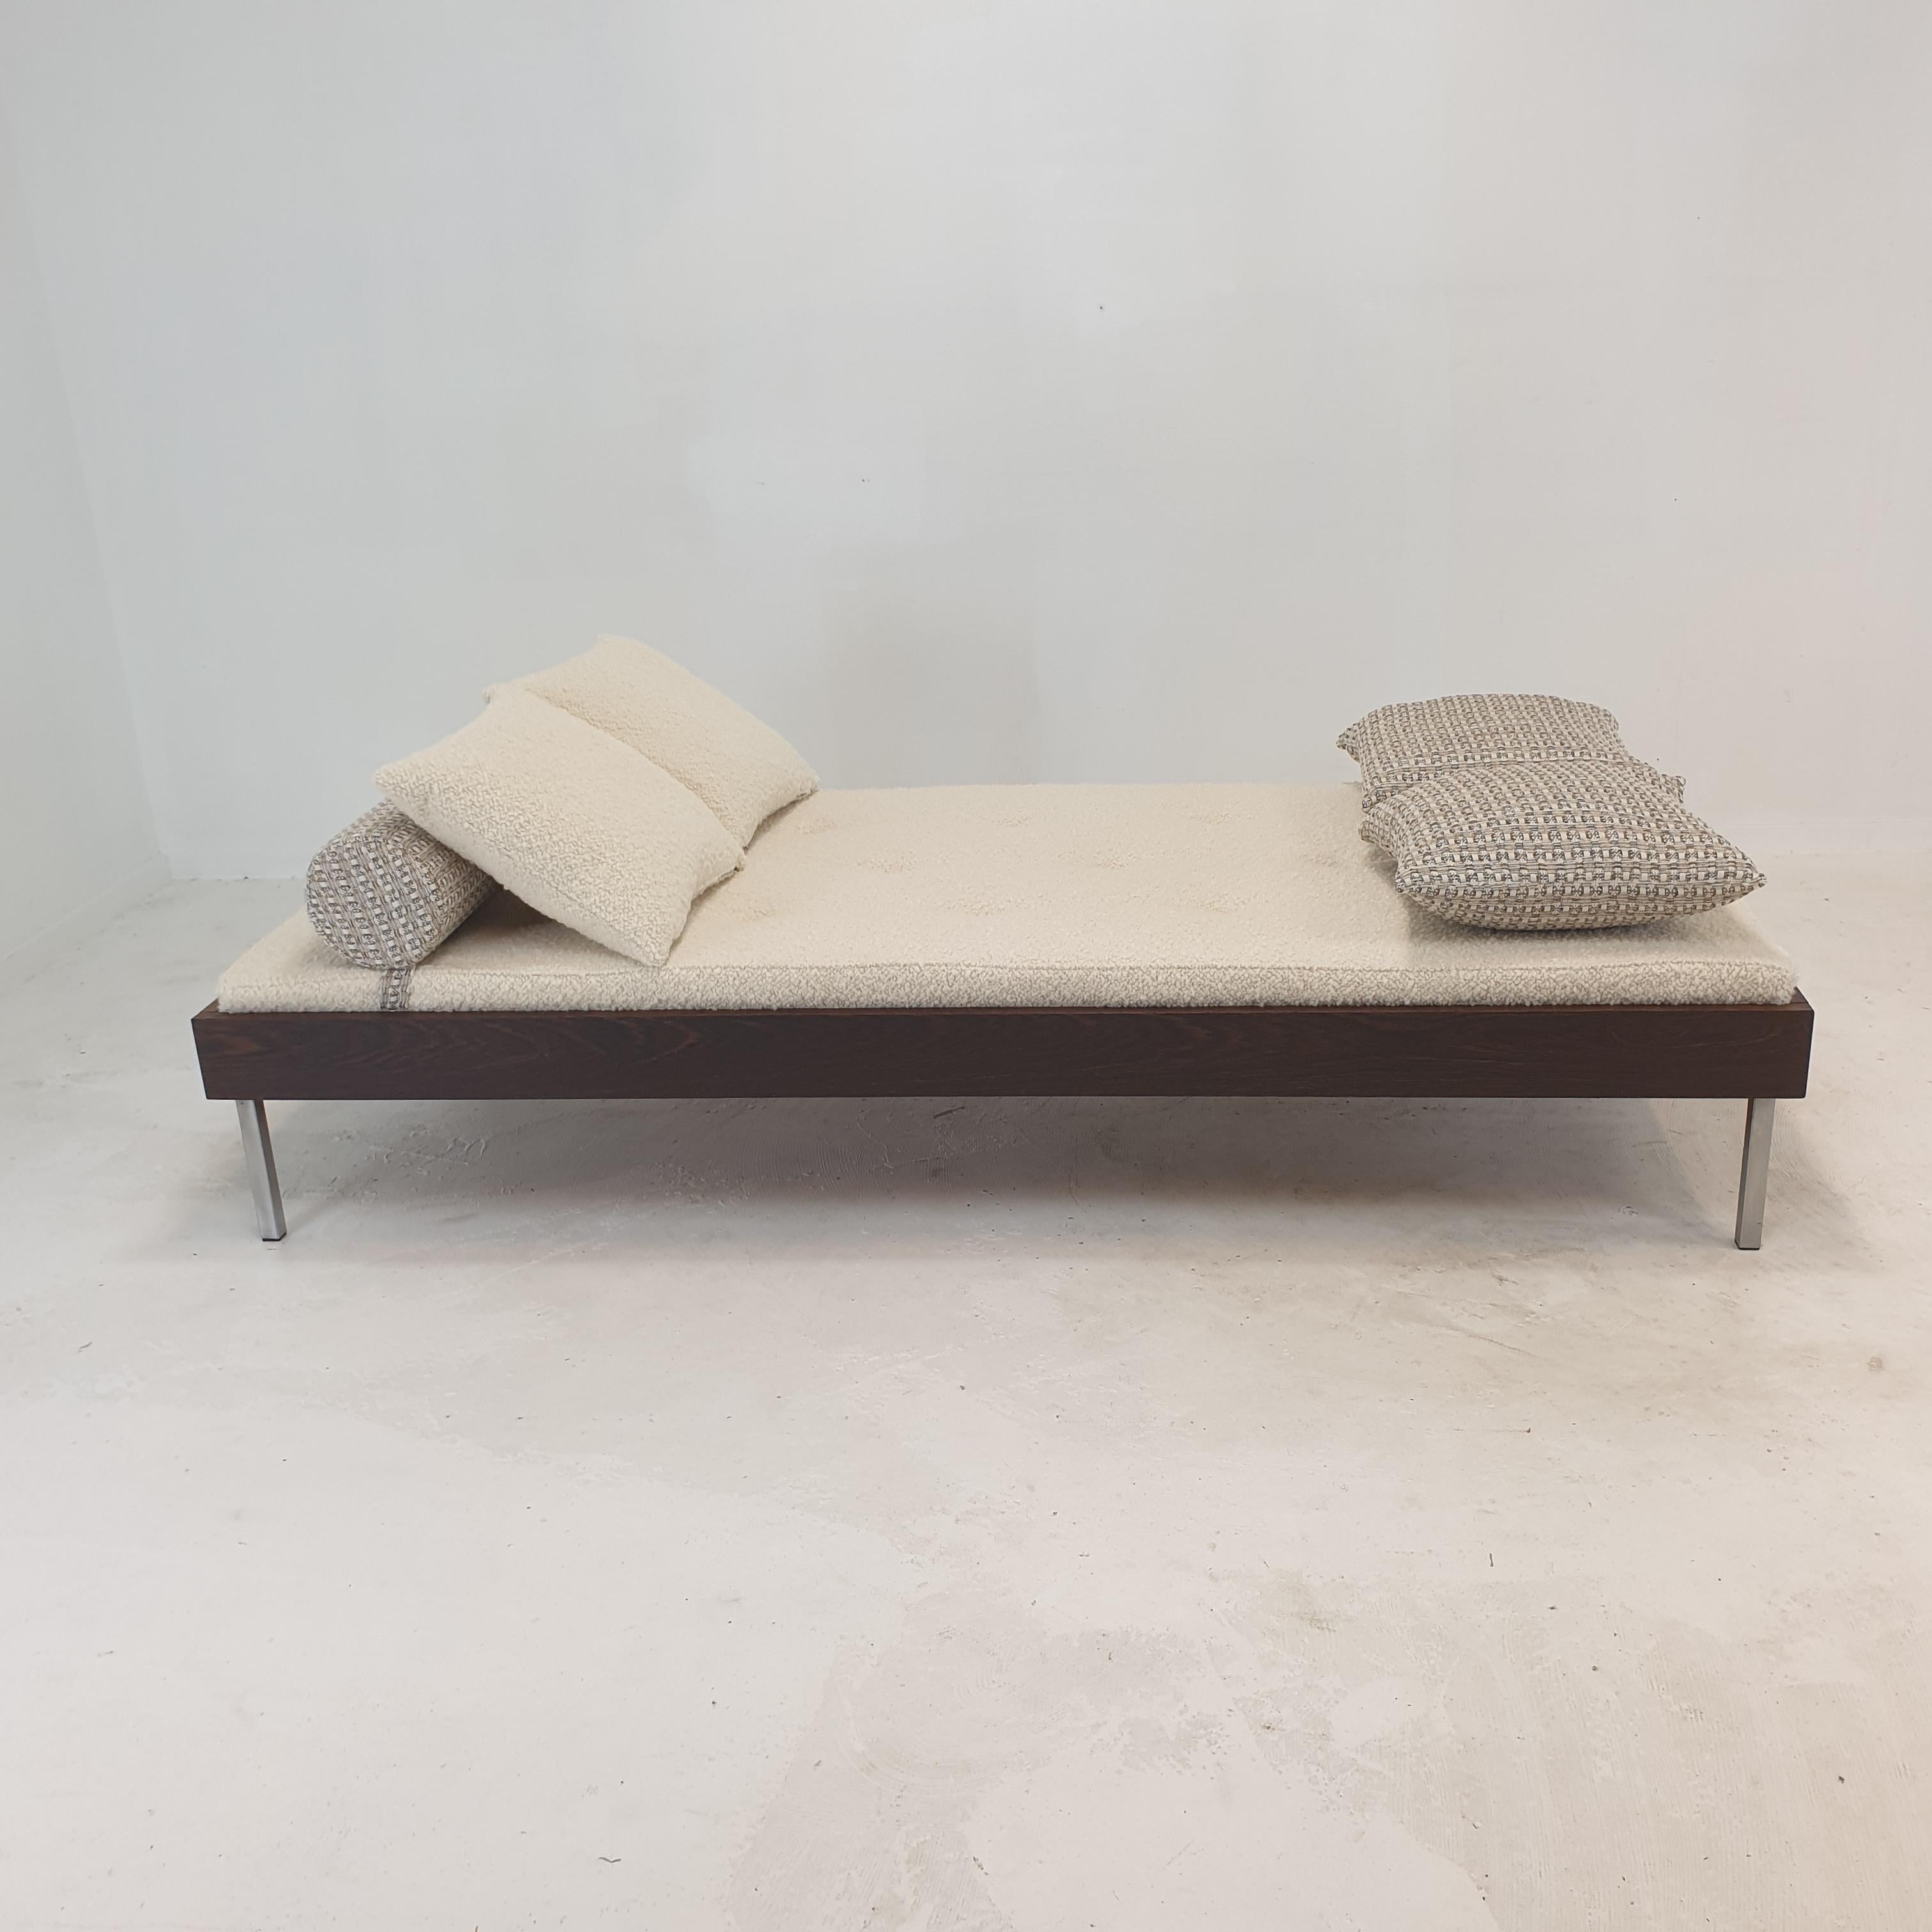 Very nice Wengé daybed, fabricated in the Netherlands in the 1970s. 

The mattress is renewed with new foam and it has just been upholstered with lovely wool fabric, the same for two cushions.

The bolster and the two other cushions are also new